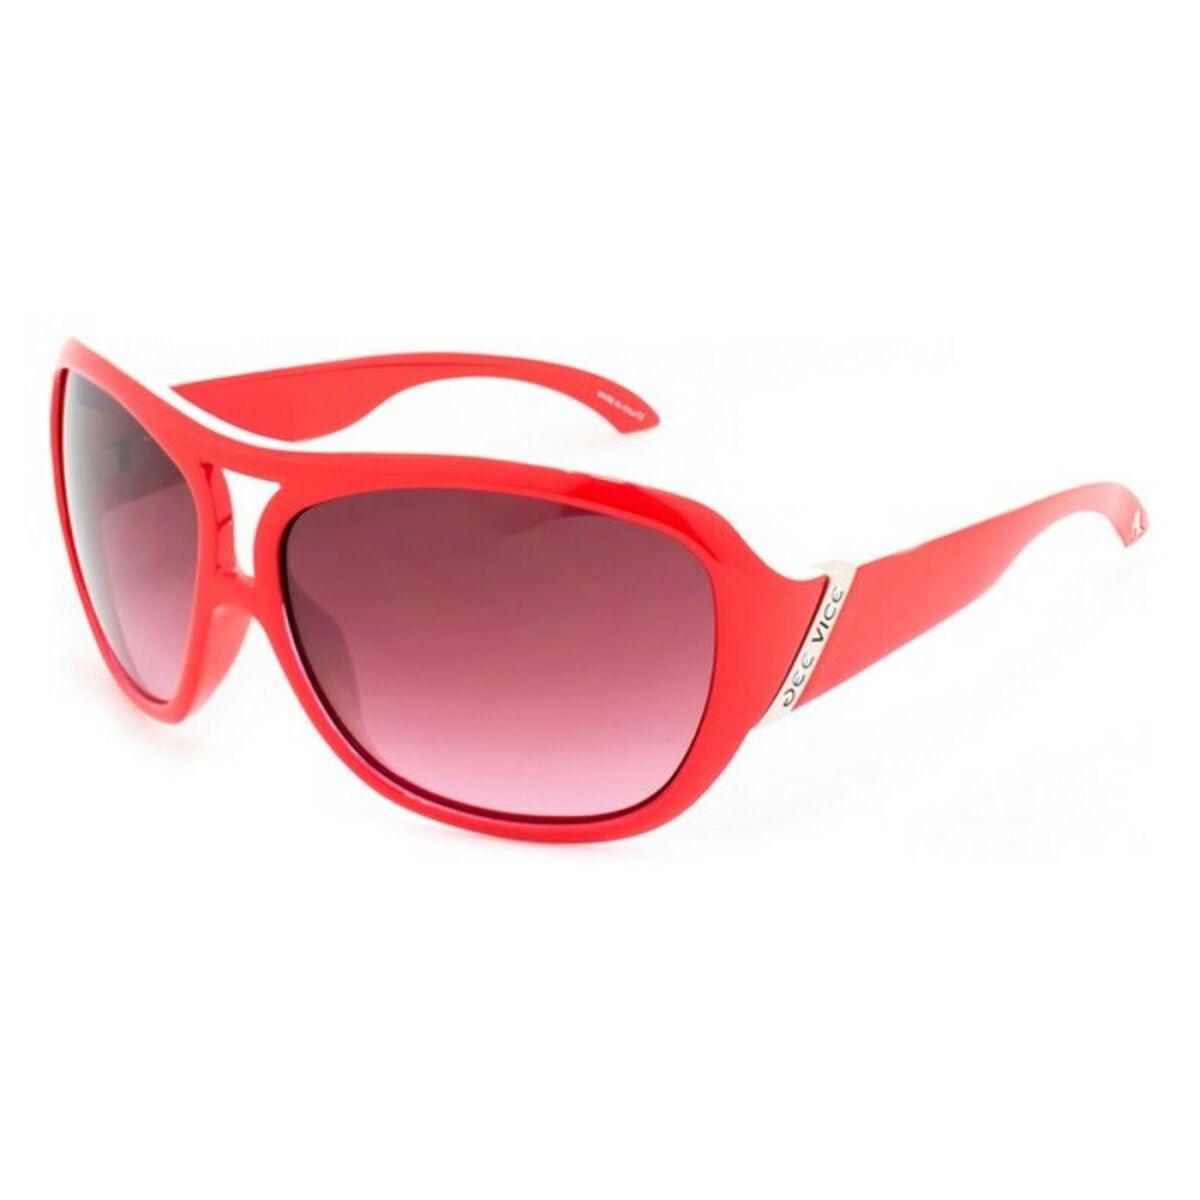 Jee Vice Ladies' Sunglasses Jv21-301115001 in Red | Lyst